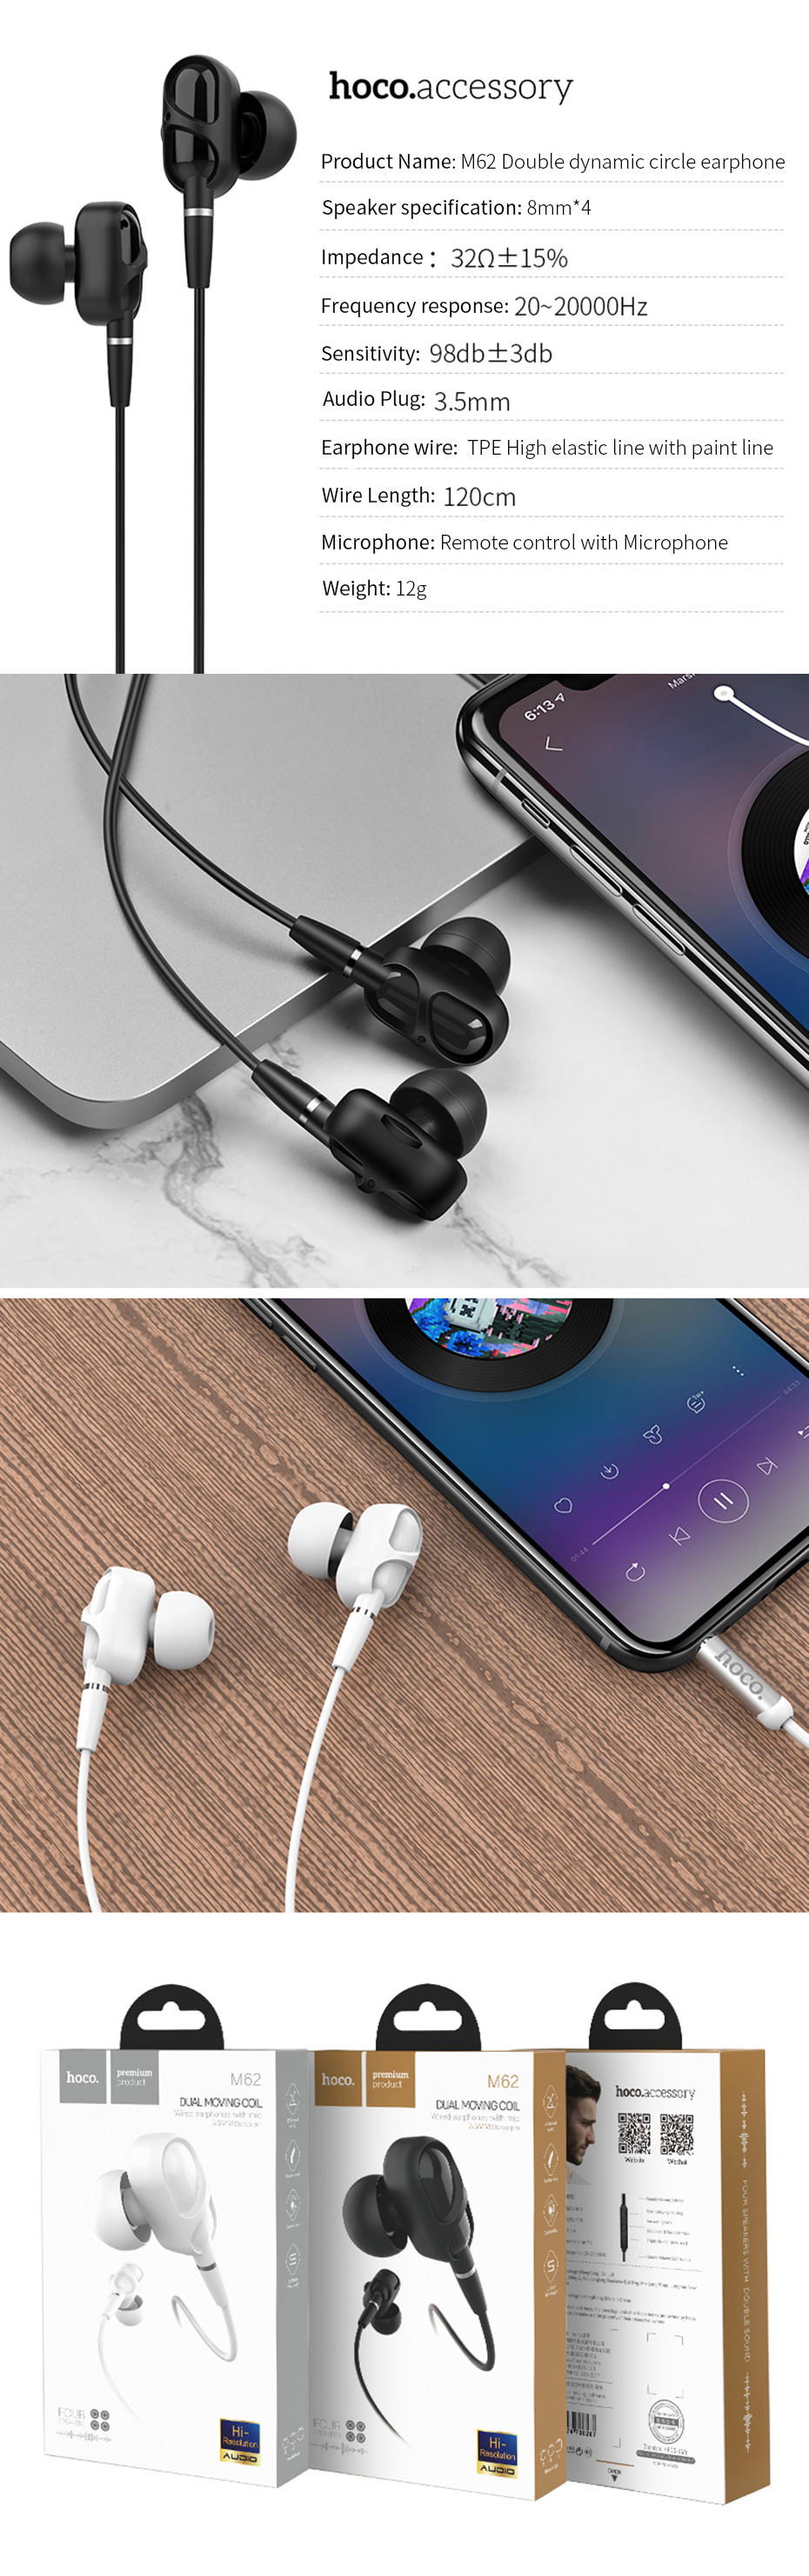 HOCO-M62-35mm-In-ear-Stereo-Earphone-Dual-Drive-Headphones-with-Mic-for-iPhone-Samsung-1556472-9